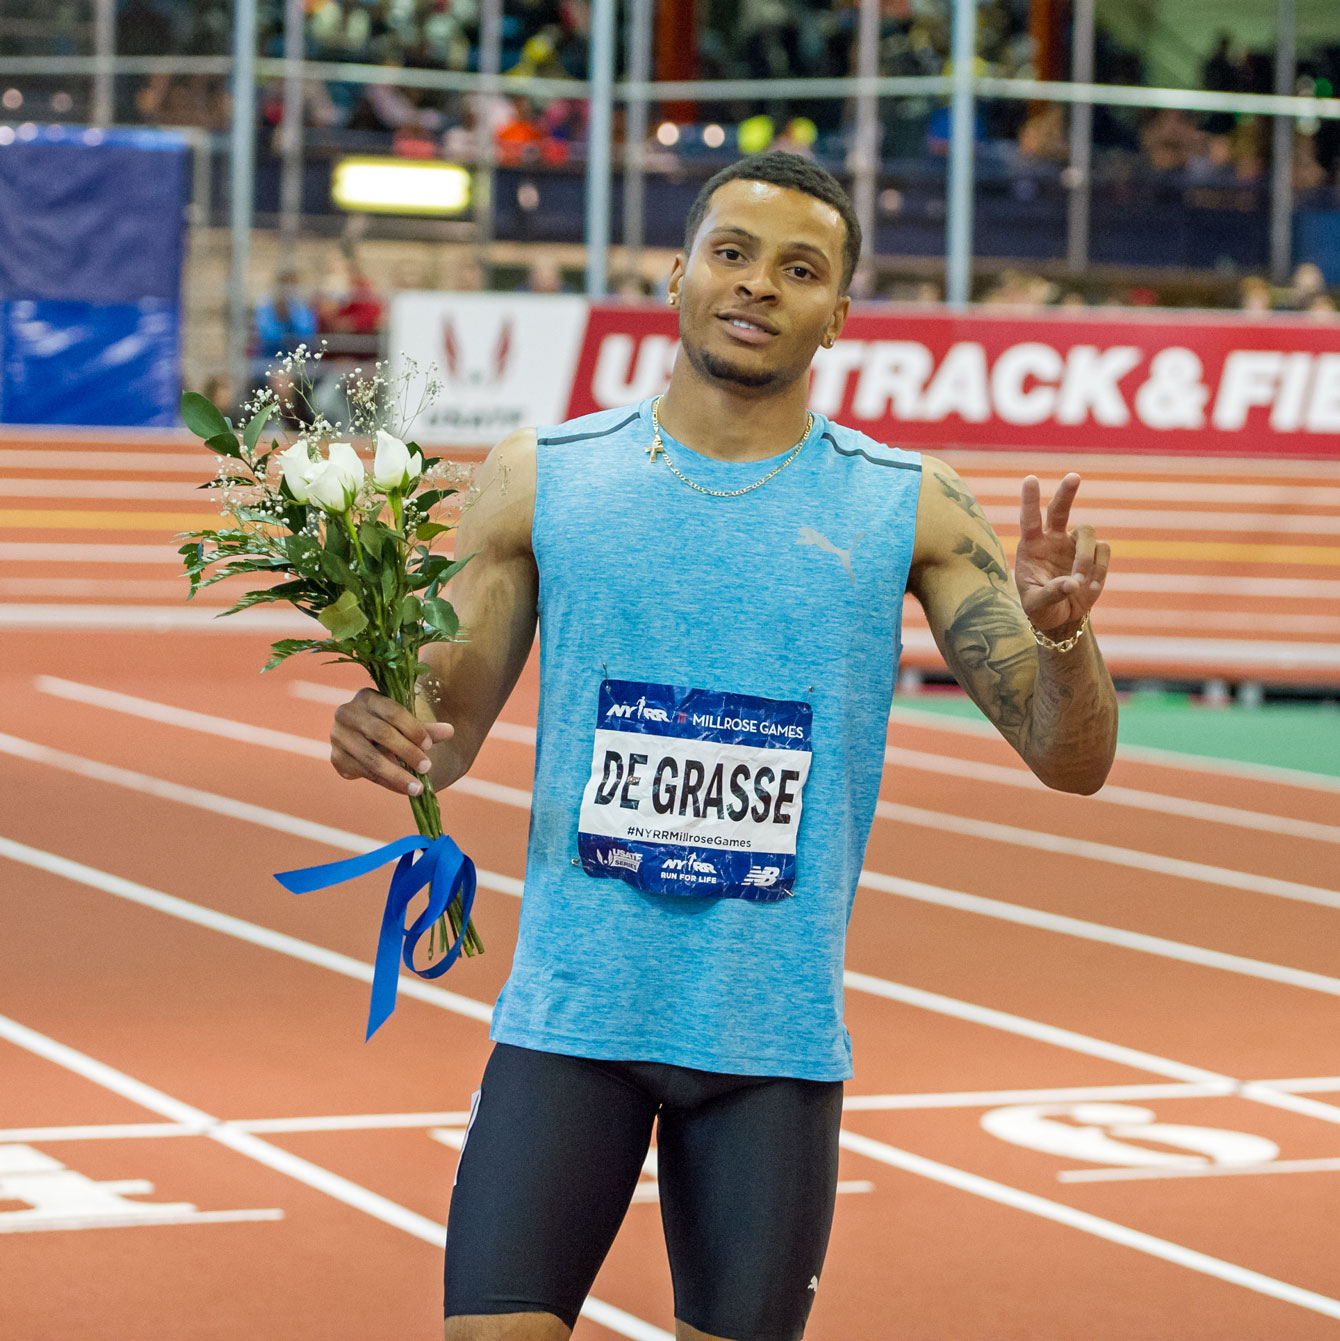 Andre De Grasse after winning the 60m race at the 2016 Millrose Games in New York City on February 20, 2016 (Photo: Robert Lombardo). 